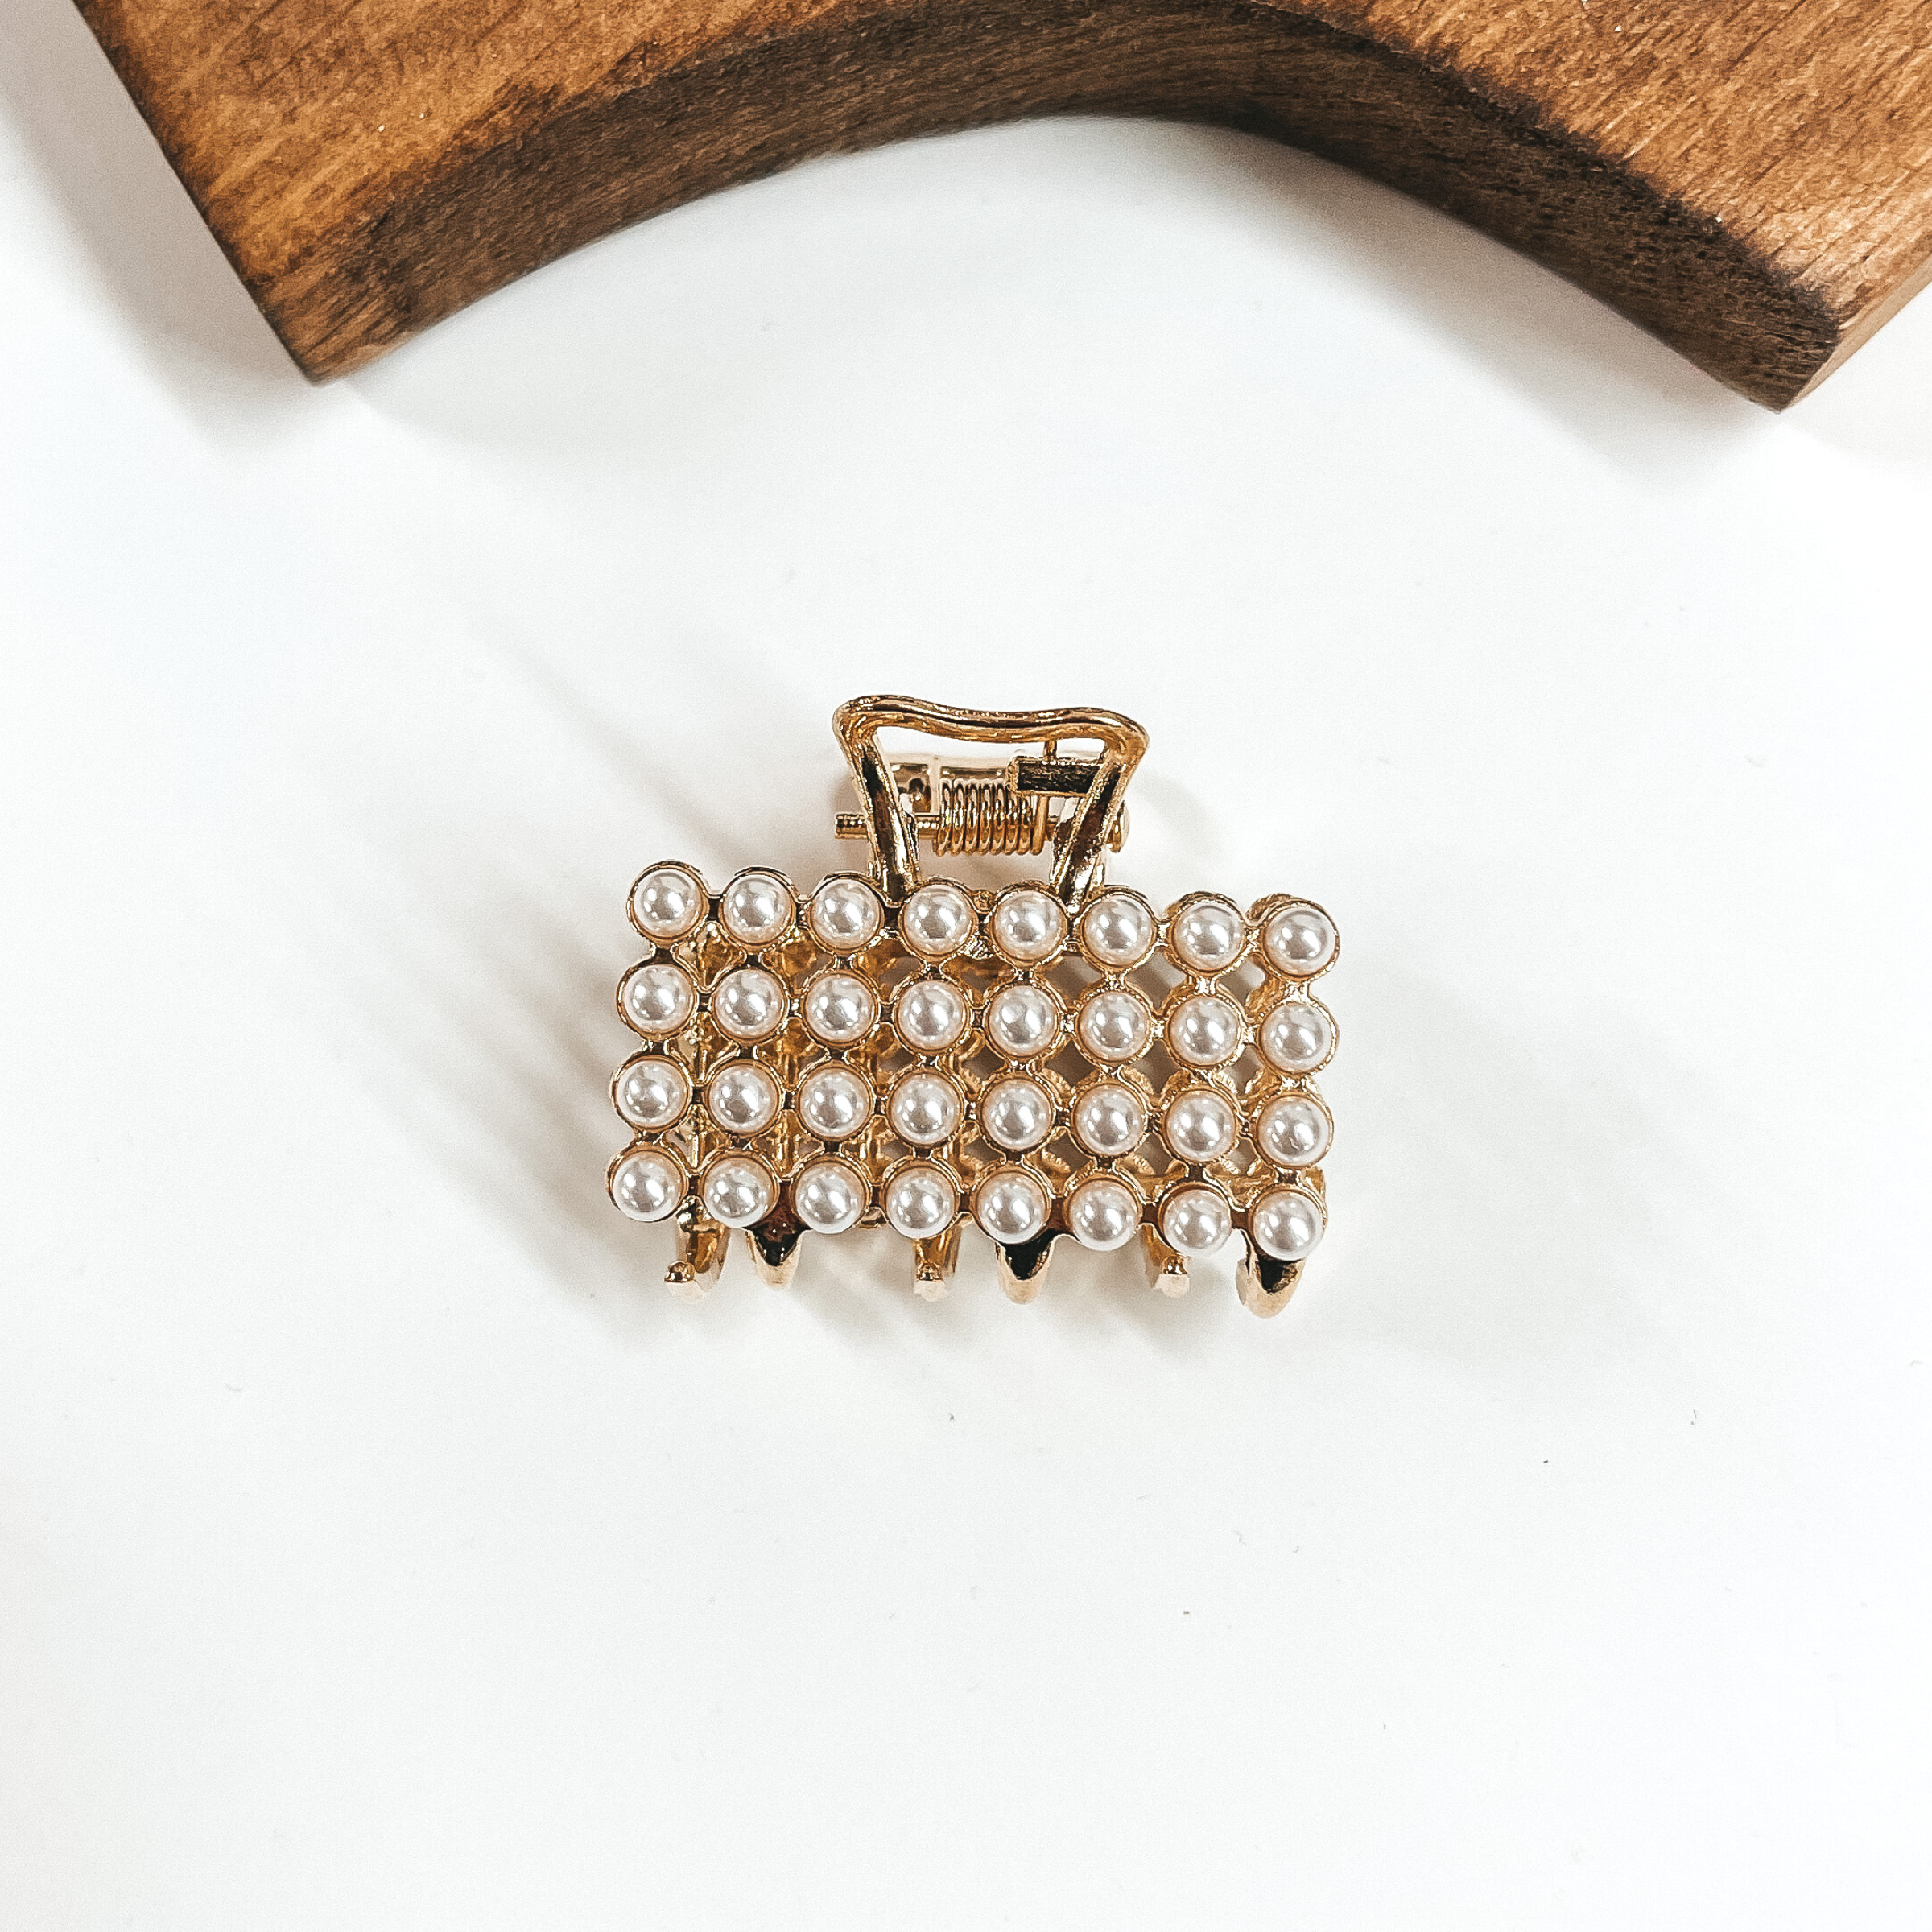 Dainty Rectangle Shaped Embellished Hair Clip - Giddy Up Glamour Boutique